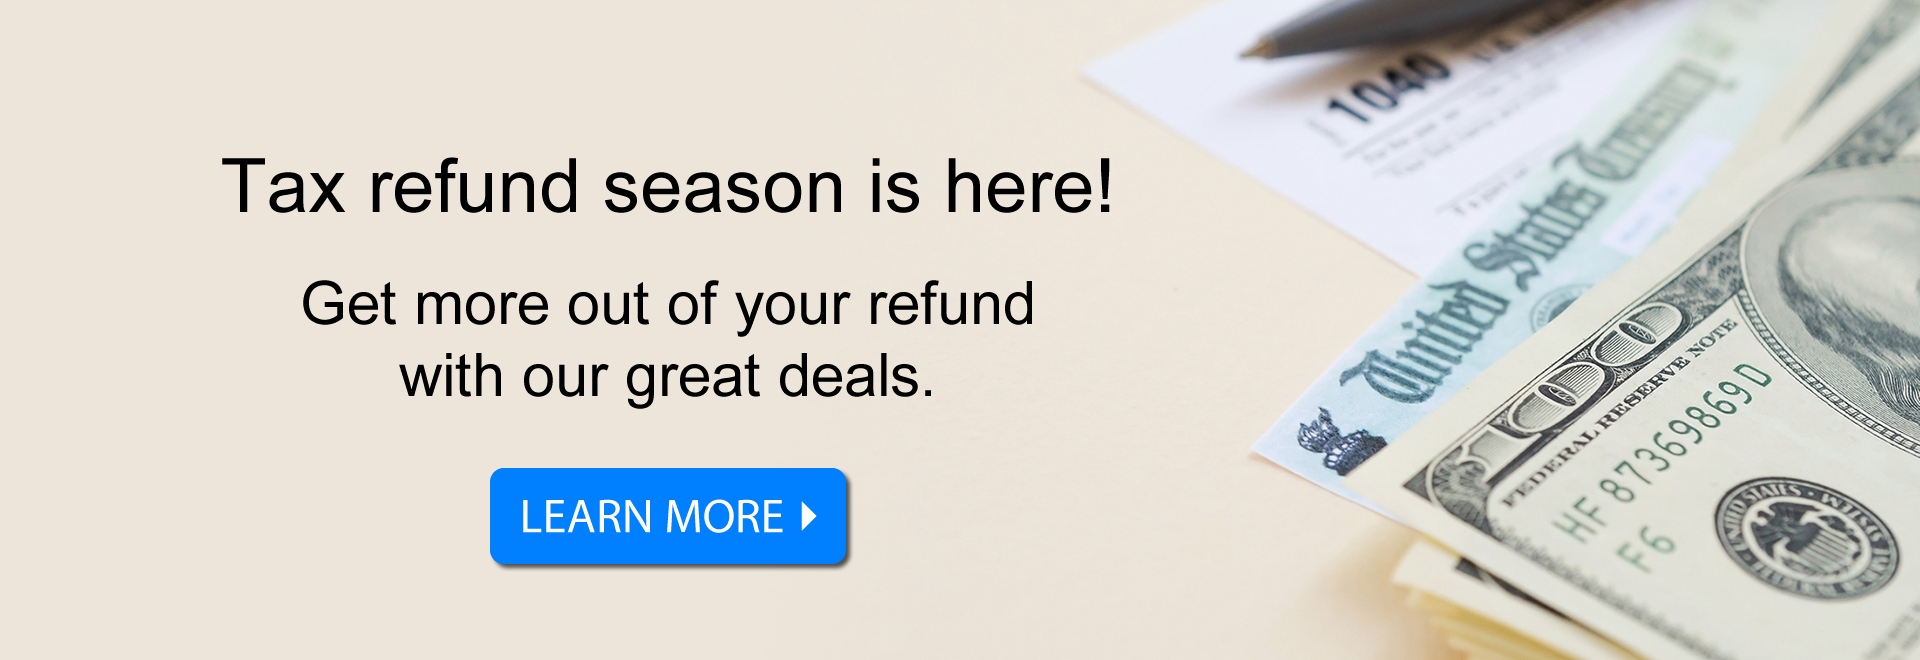 Tax refund season is here! Get more out of your refund with our great deals